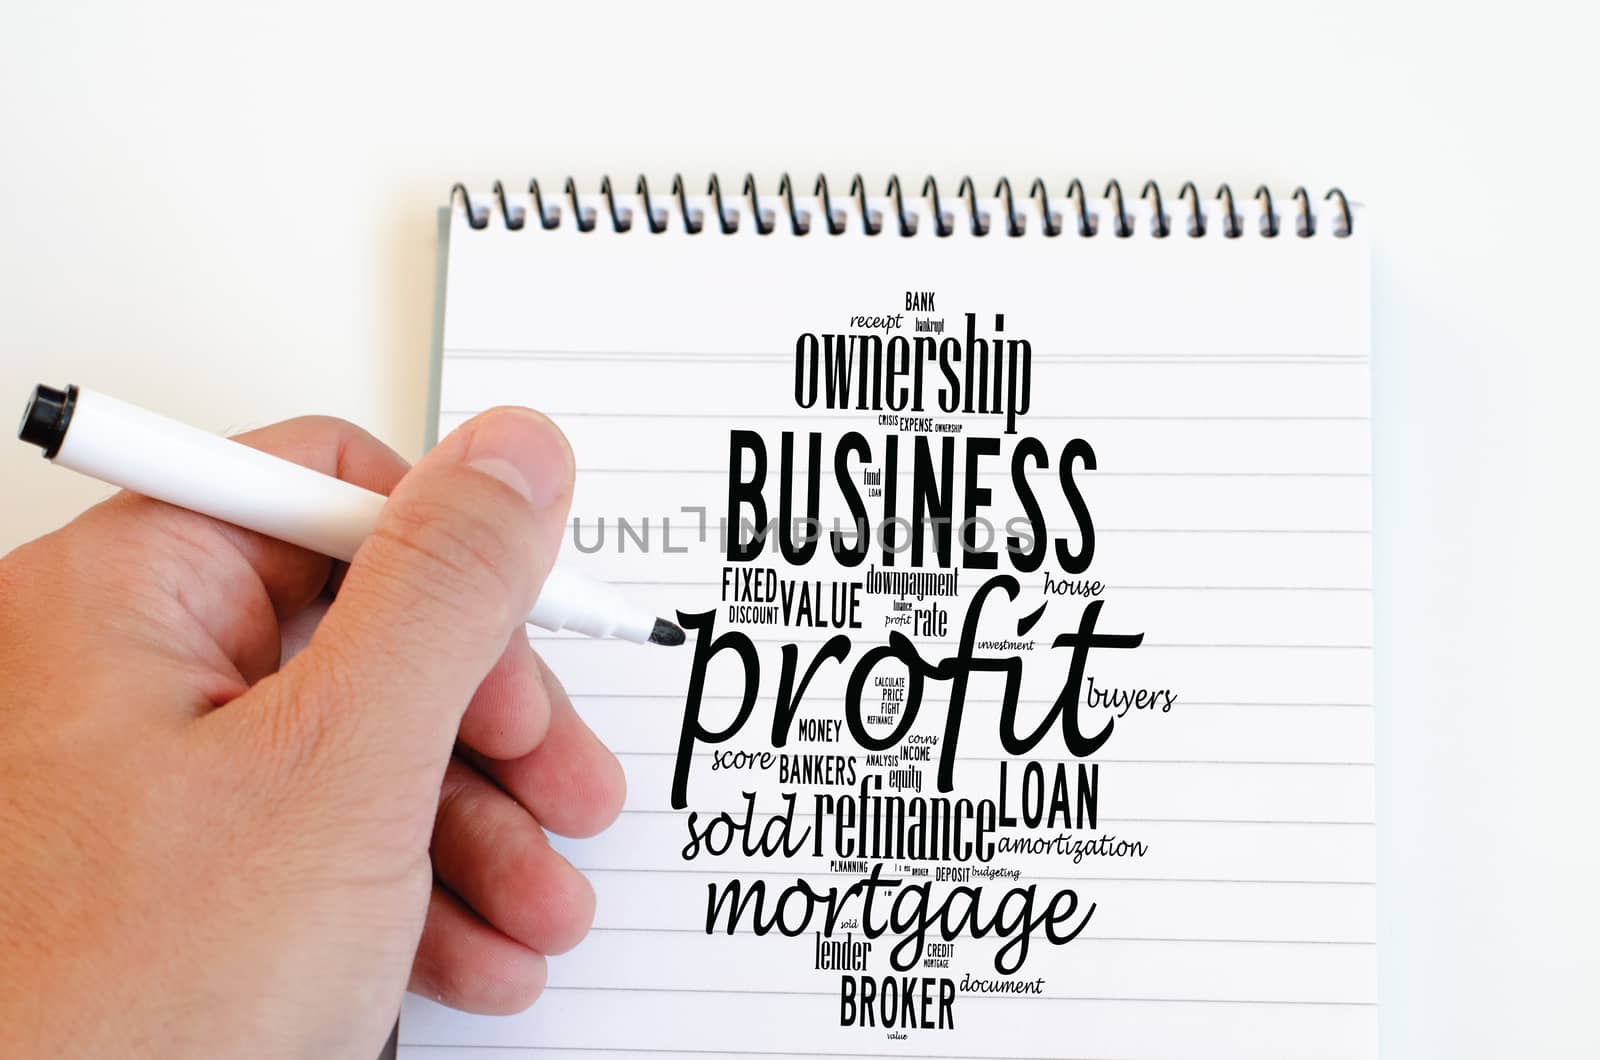 Profit word cloud collage over notepad background